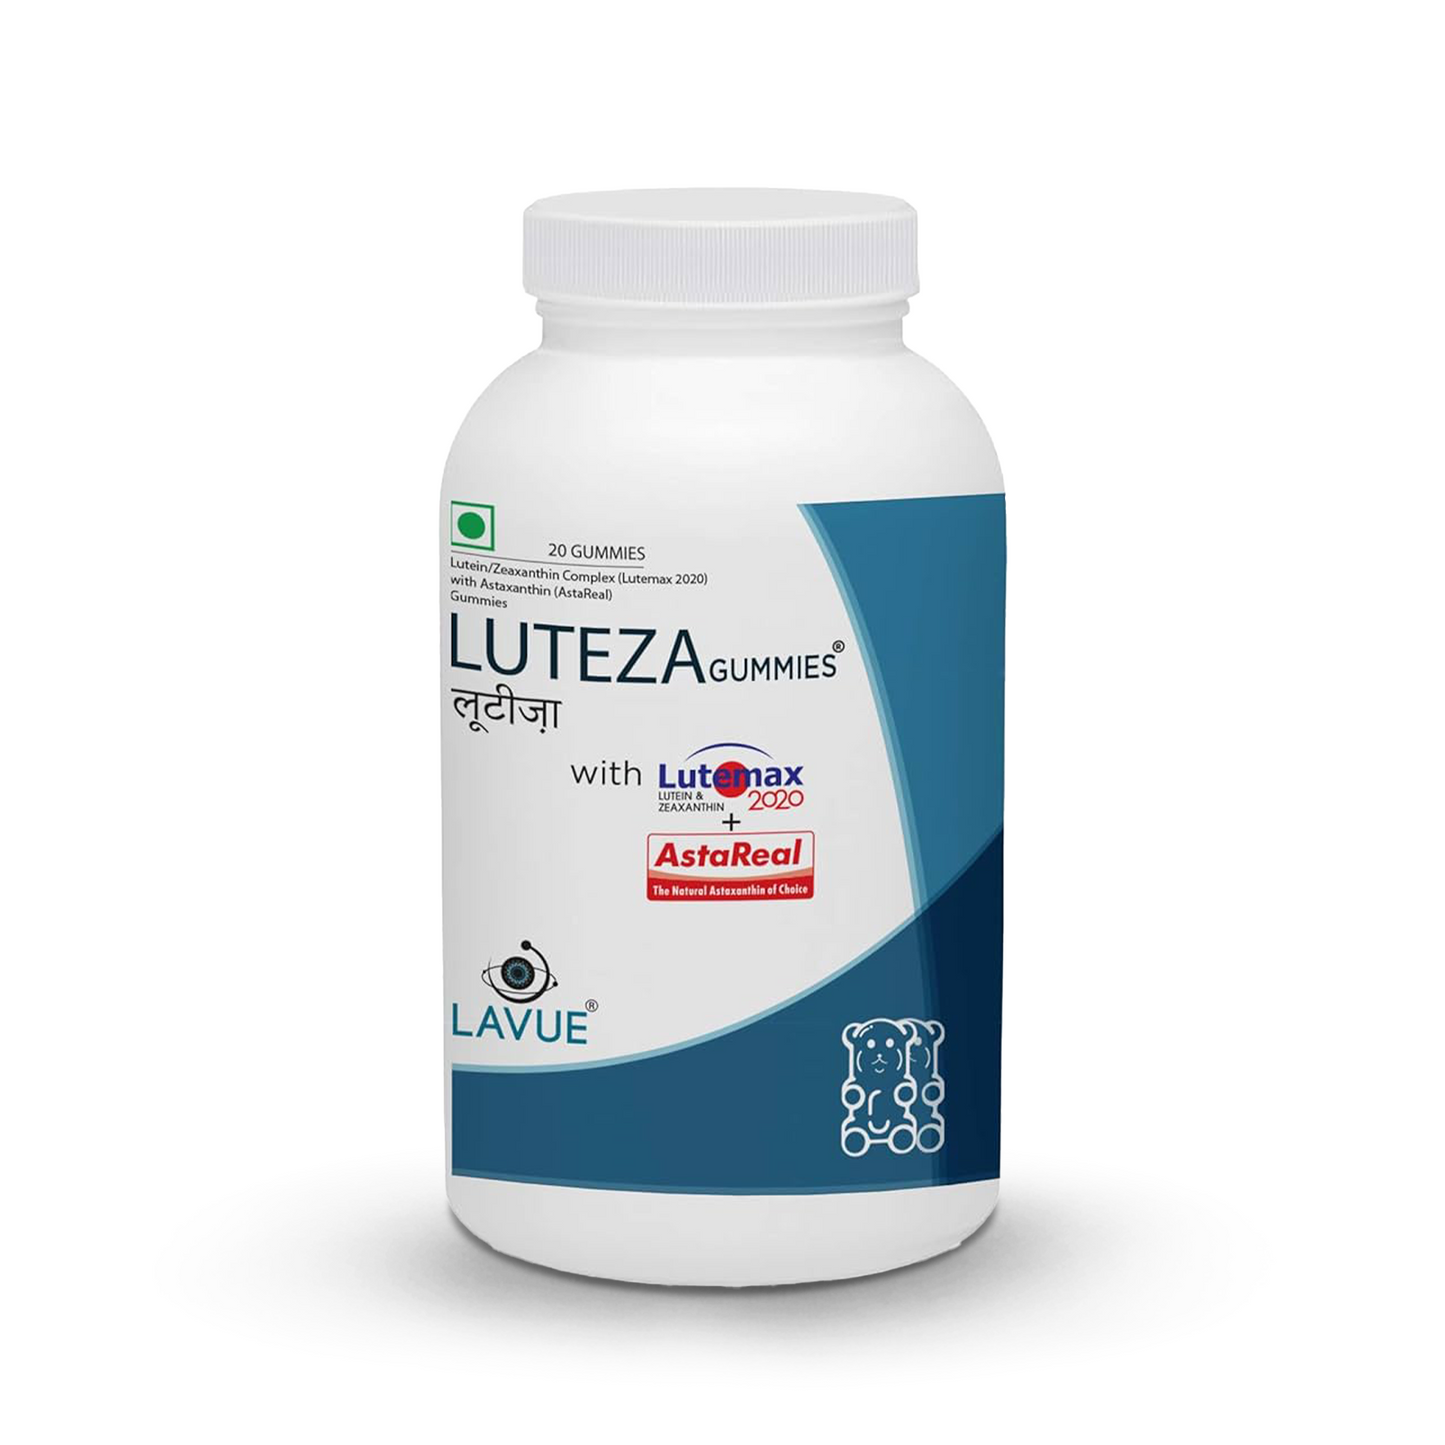 Luteza - Safety Shield for Eyes, 20 Gummies